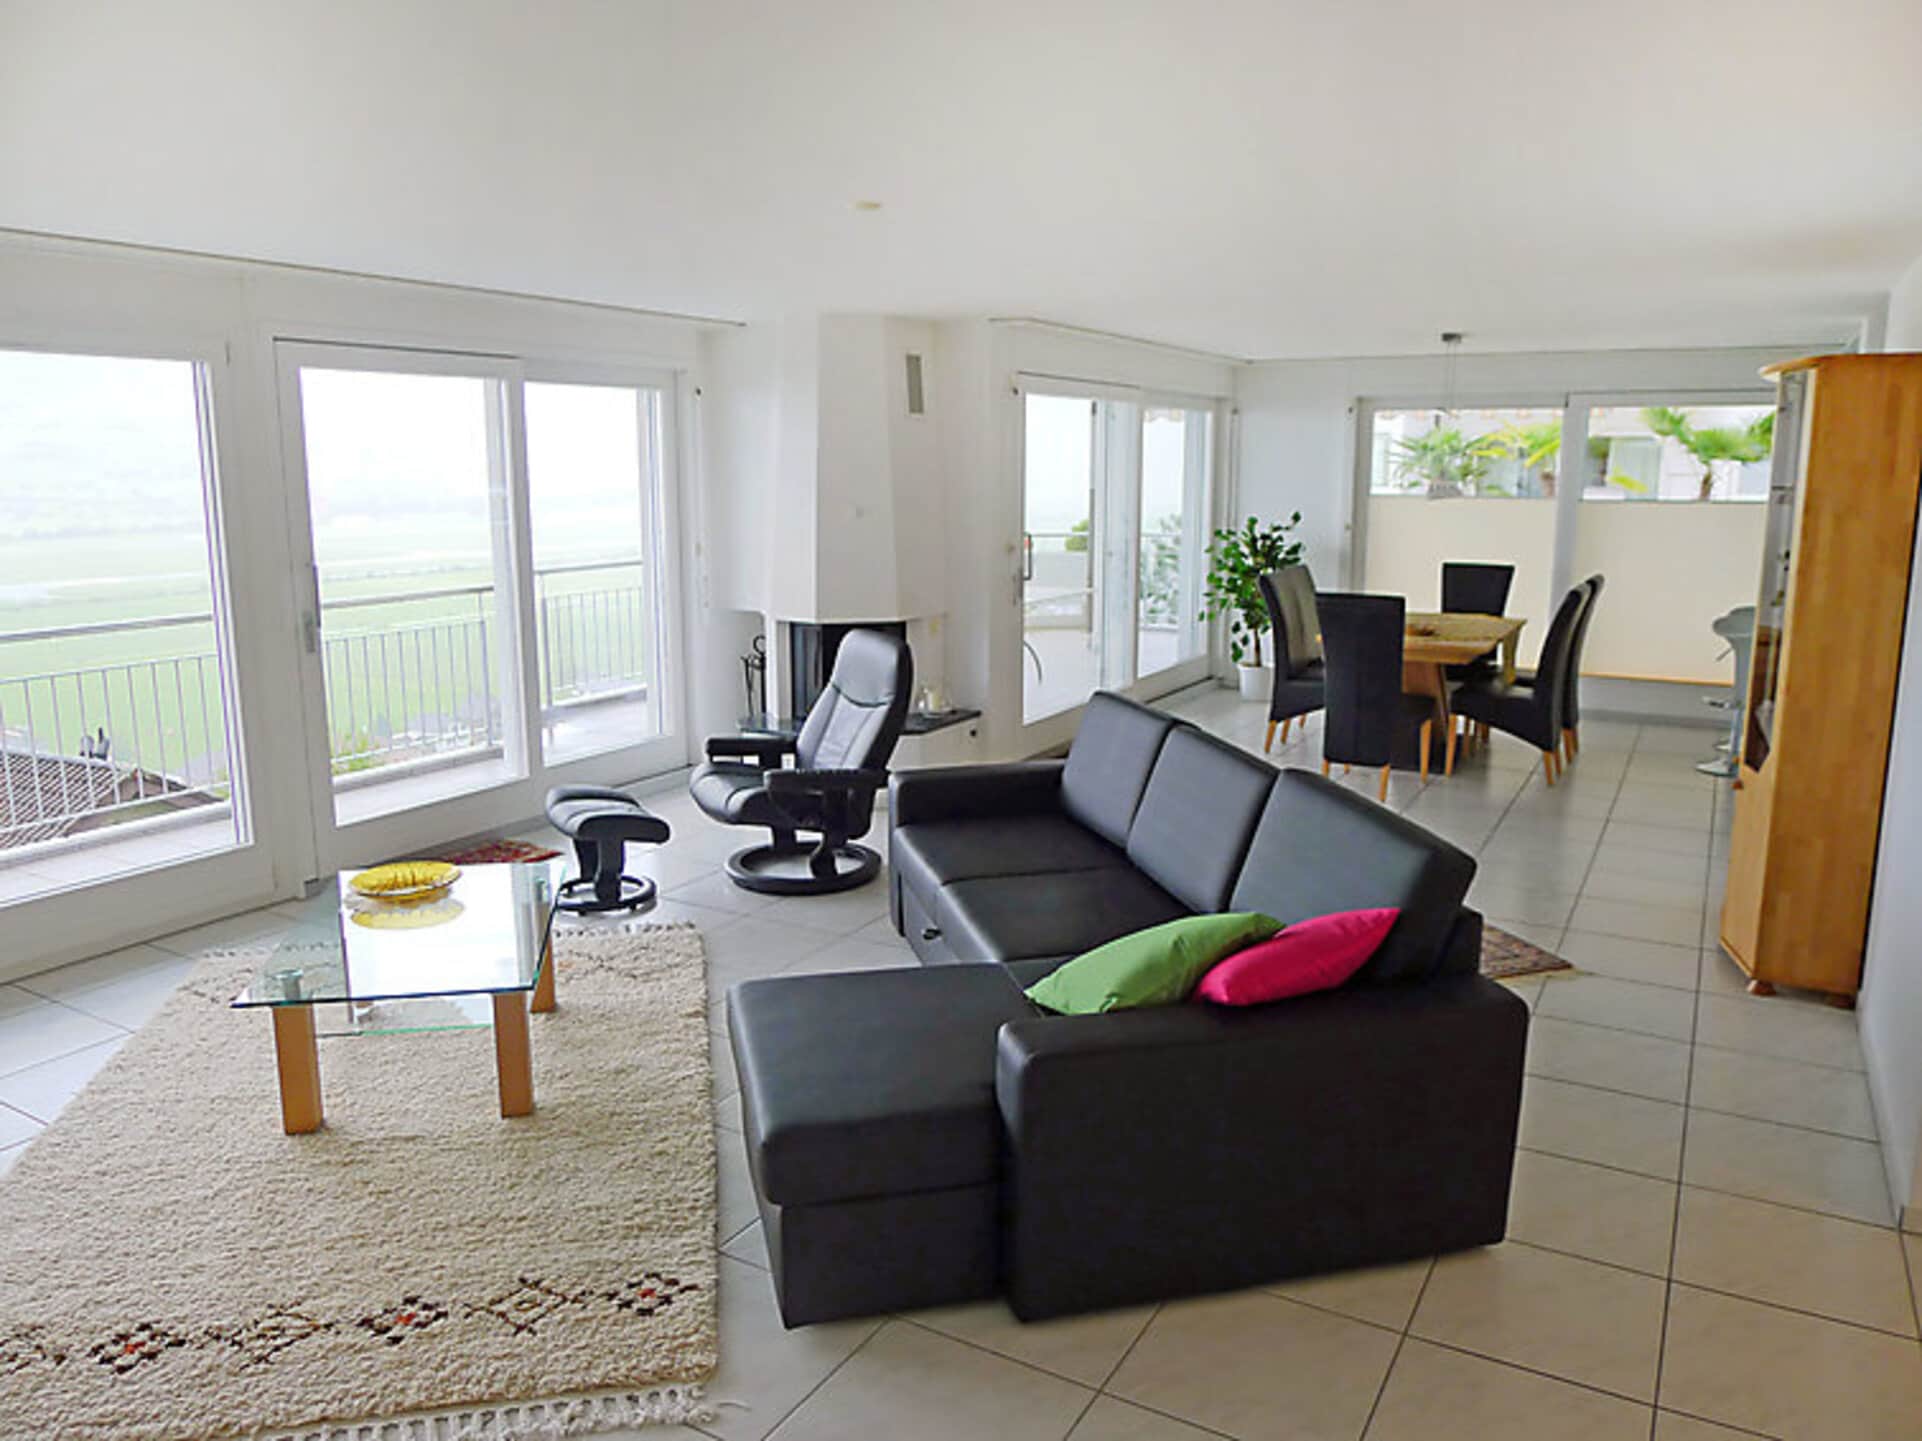 Property Image 2 - Property Manager Villa with First Class Amenities, Nidwalden Villa 1001